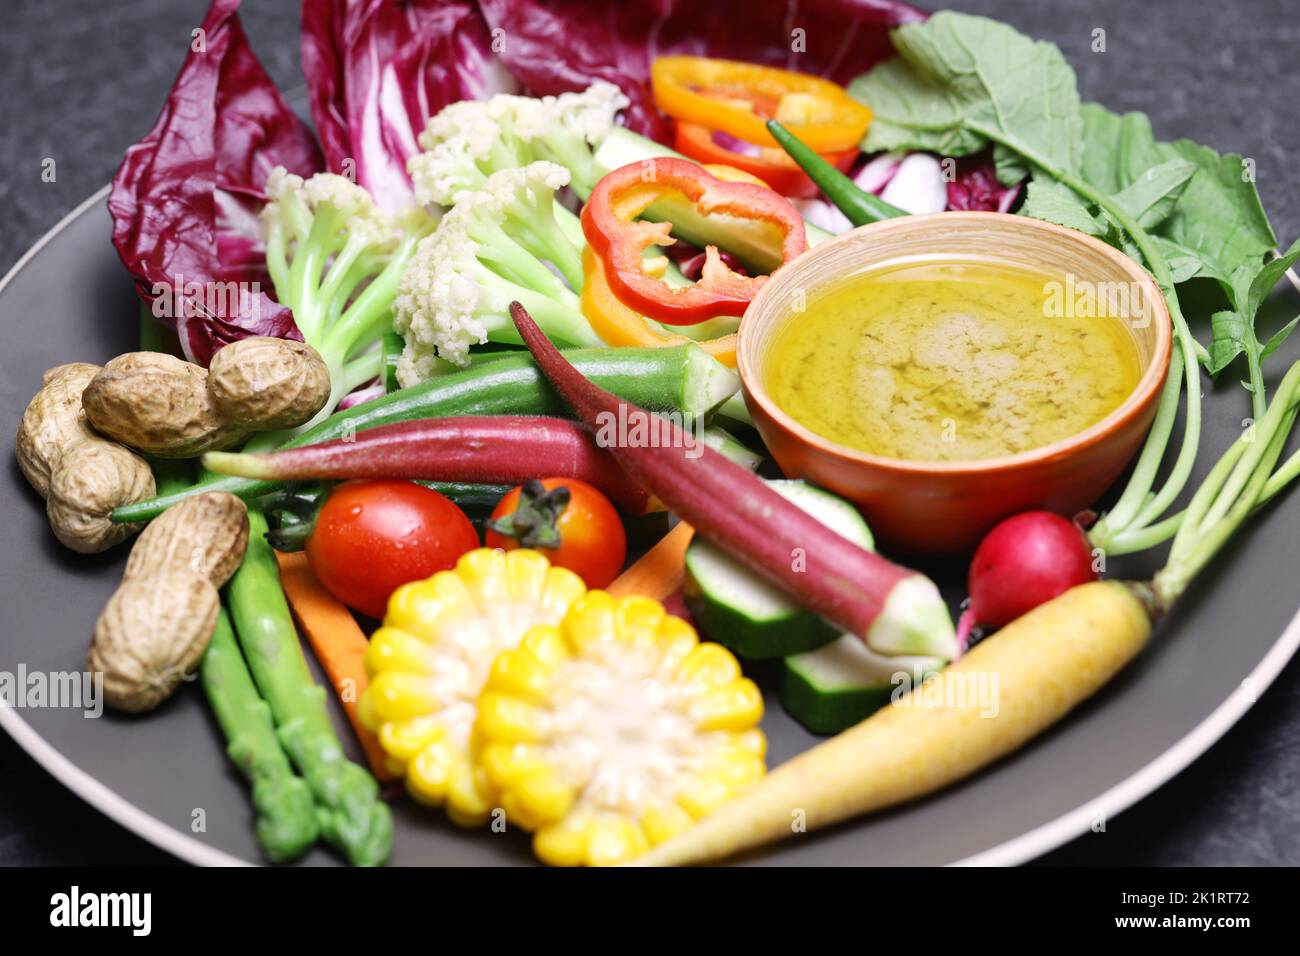 vegetable salad and bagna cauda (a garlic and anchovy sauce for dipping vegetables) Stock Photo